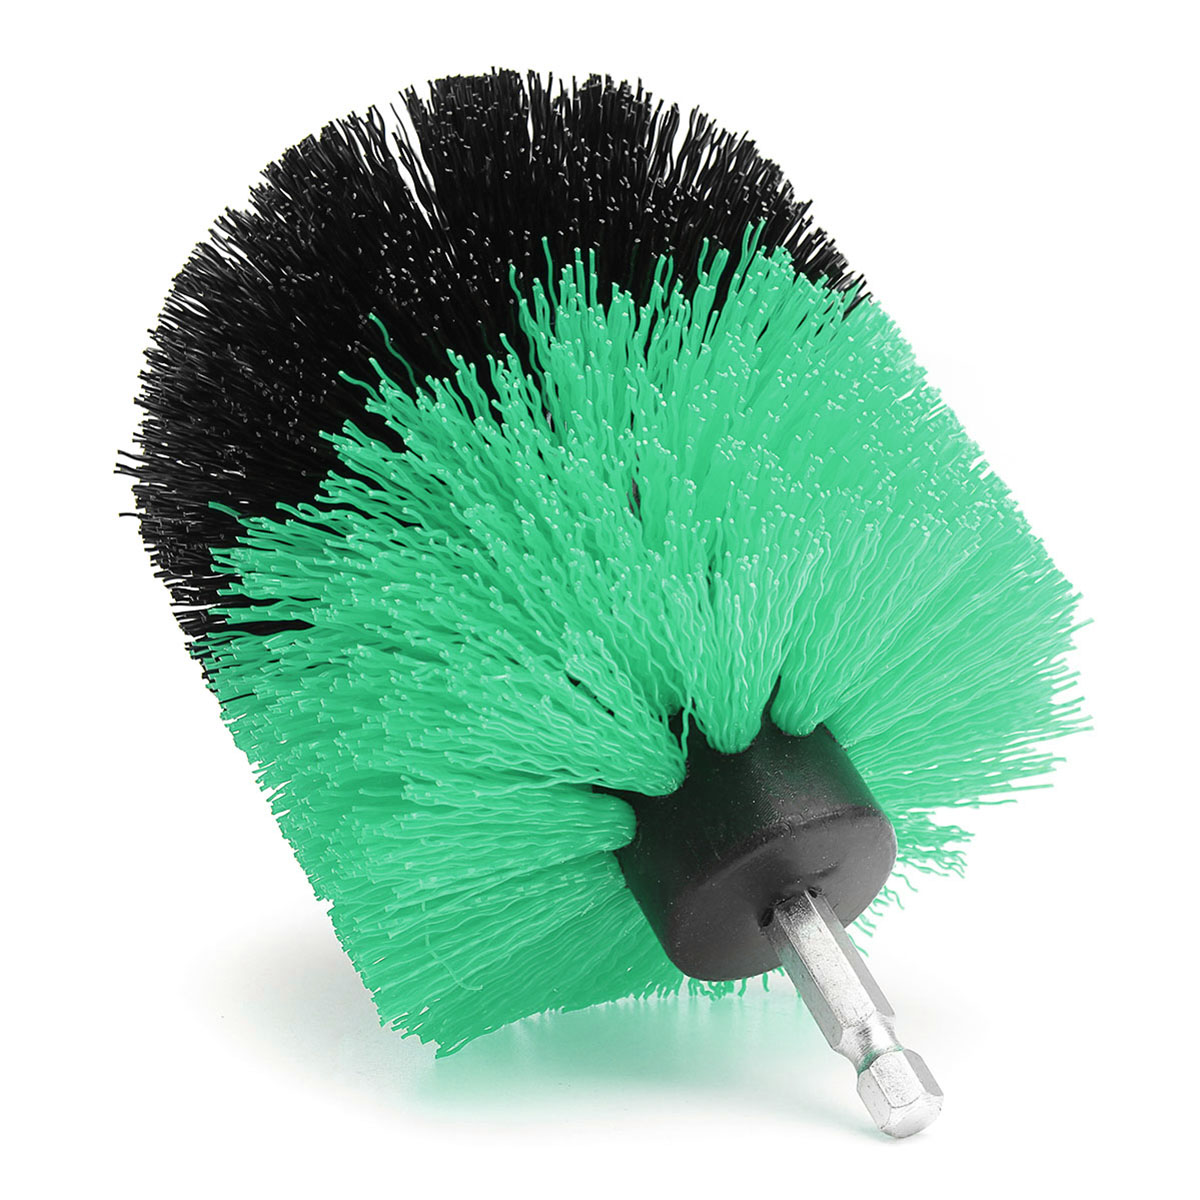 35-Inch-Drill-Cleaning-Ball-Brush-Power-Scrubber-Bathroom-Tub-Tile-Cleaning-Tool-1329638-5